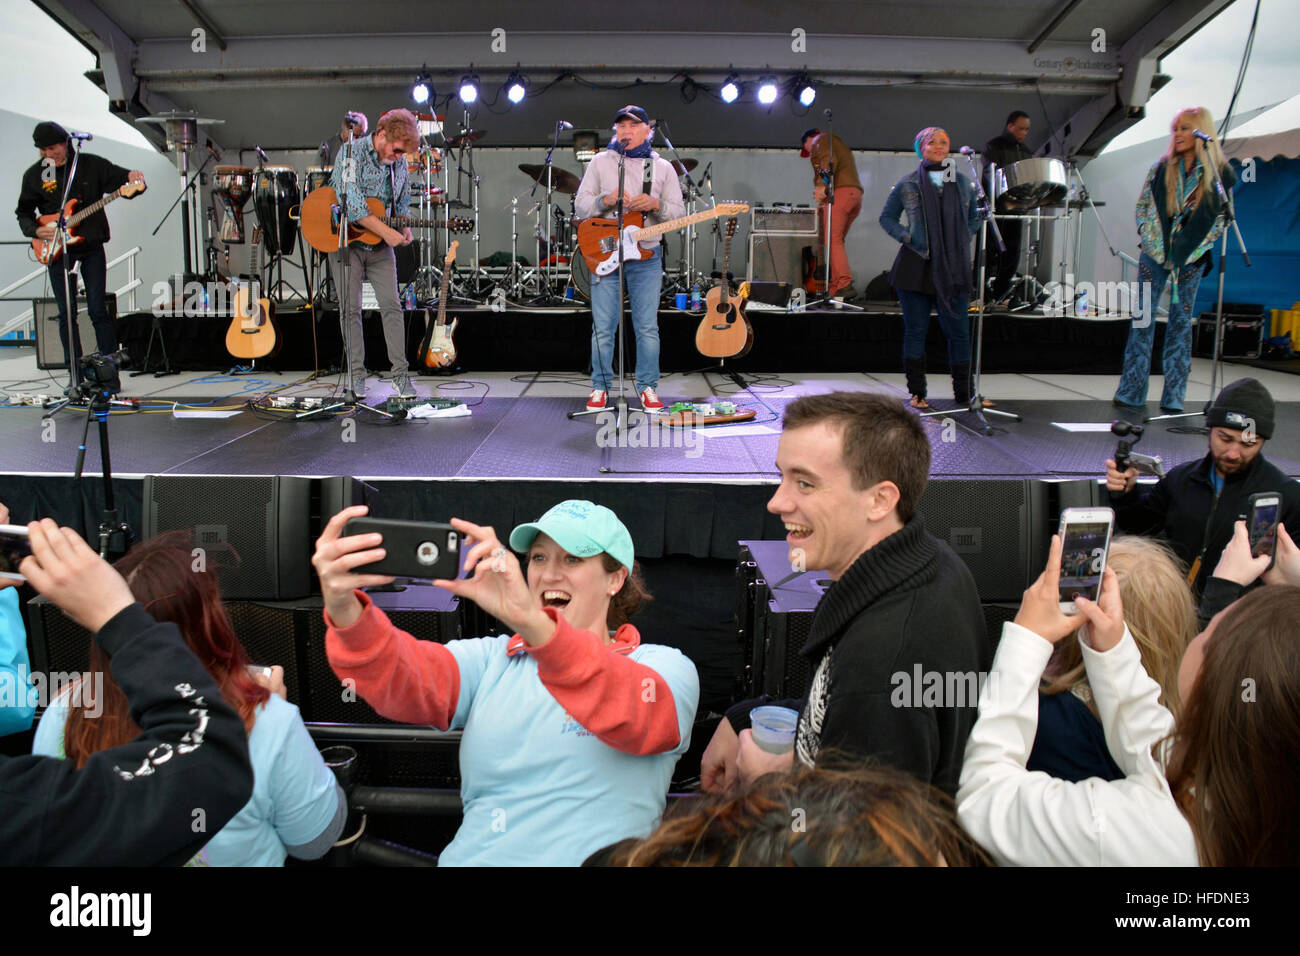 YOKOSUKA, Japan (October 30, 2016) – A person in the crowd takes a selfie with recording Artist Jimmy Buffett and the Coral Reefer Band during a Navy Entertainment Sponsored concert for Sailors and family members at Fleet Activities (FLEACT) Yokosuka.  FLEACT Yokosuka provides, maintains, and operates base facilities and services in support of 7th Fleet’s forward-deployed naval forces, 83 tenant commands, and 24,000 military and civilian personnel. (U.S. Navy photo by Petty Officer 1st Class Peter Burghart/Released)161030-N-XN177-044  Join the conversation: http://www.navy.mil/viewGallery.asp  Stock Photo